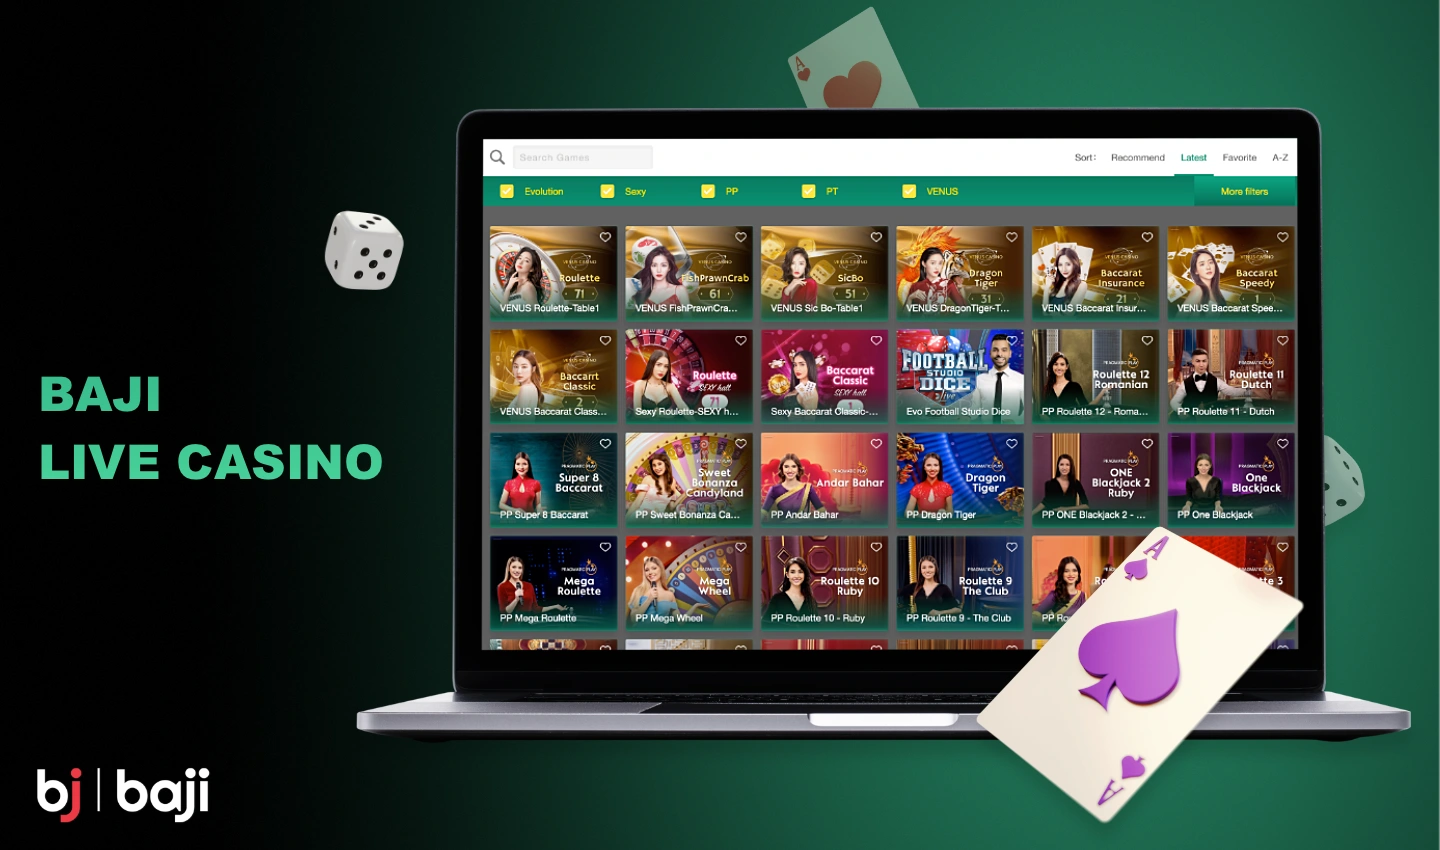 A variety of live dealer games are available at Baji Live Casino